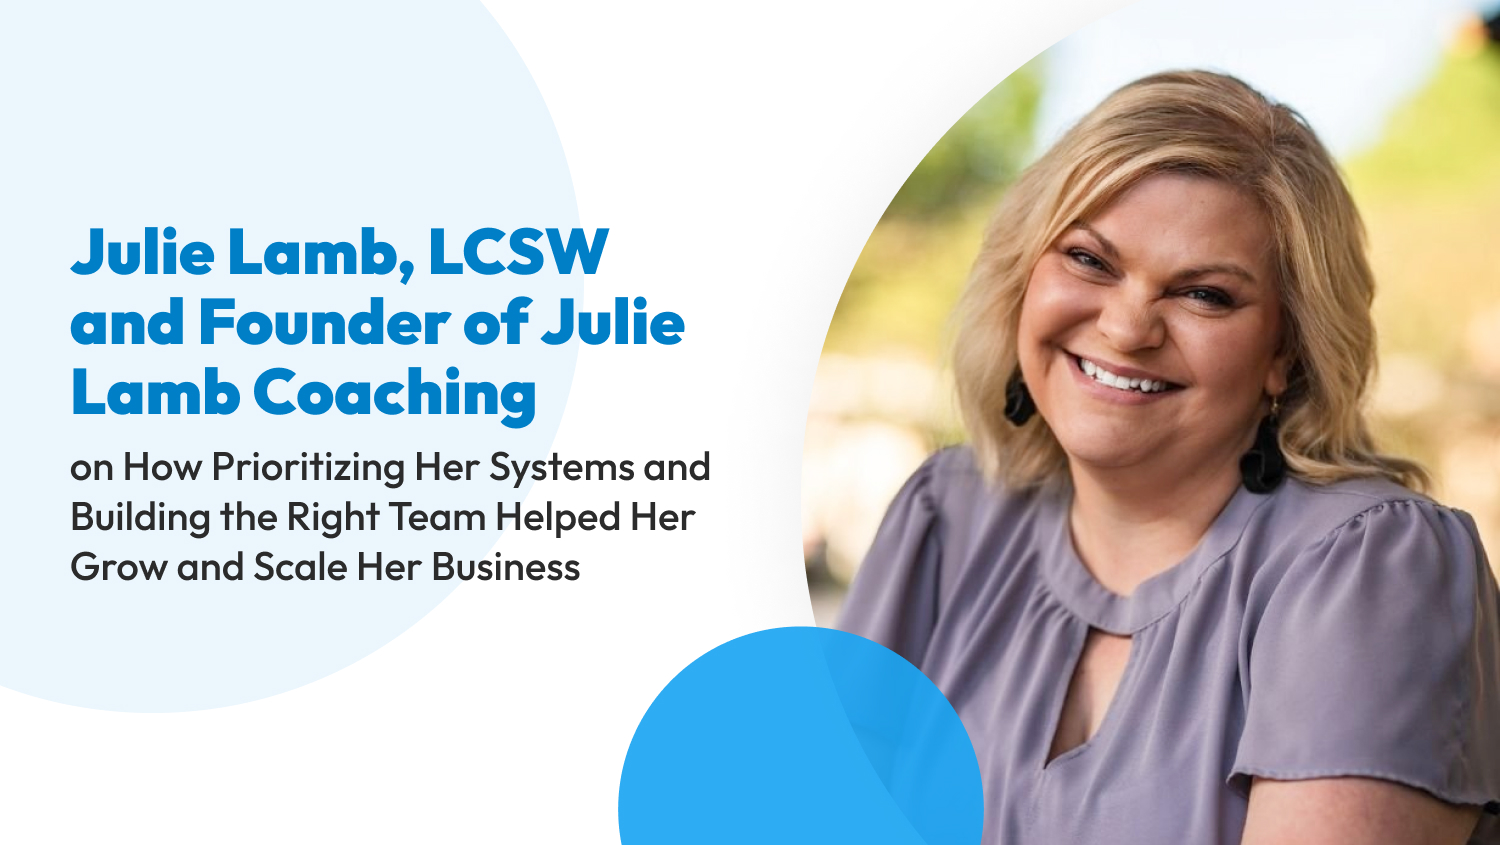 Julie Lamb, LCSW and Founder of Julie Lamb Coaching